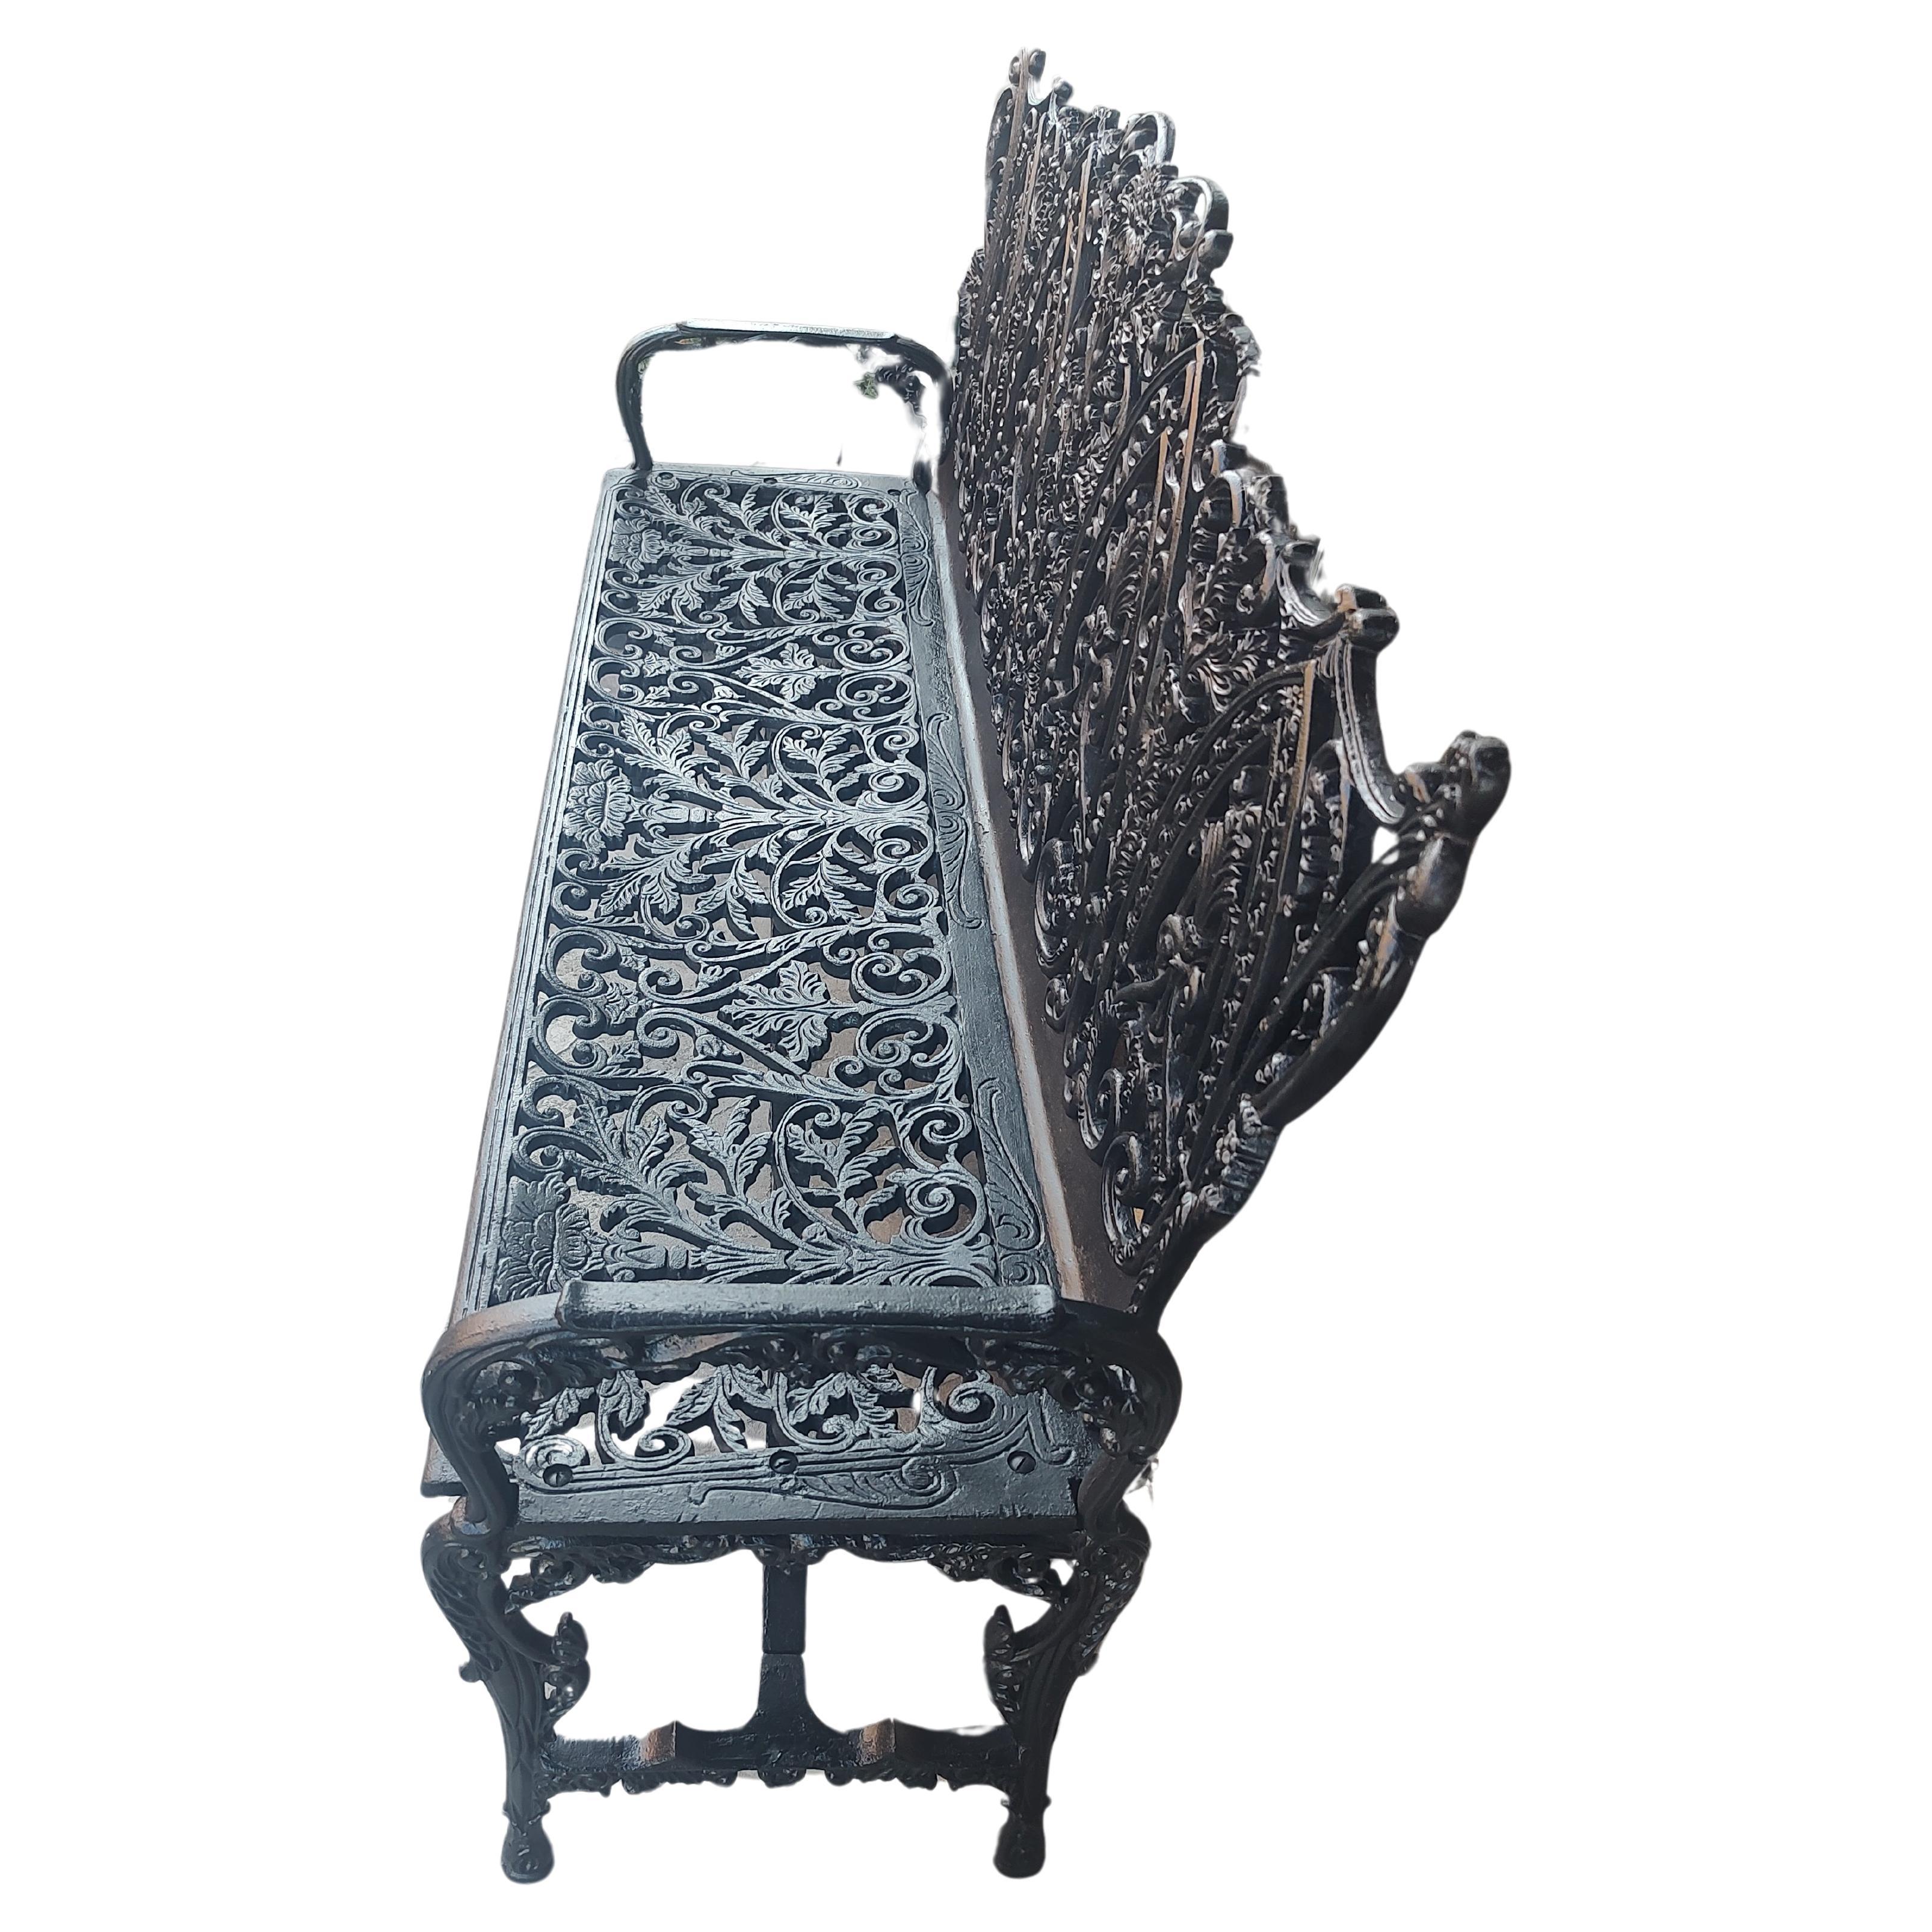 American Large Cast Iron Garden Bench In The Style of Art Noveau Renaissance Revival  For Sale